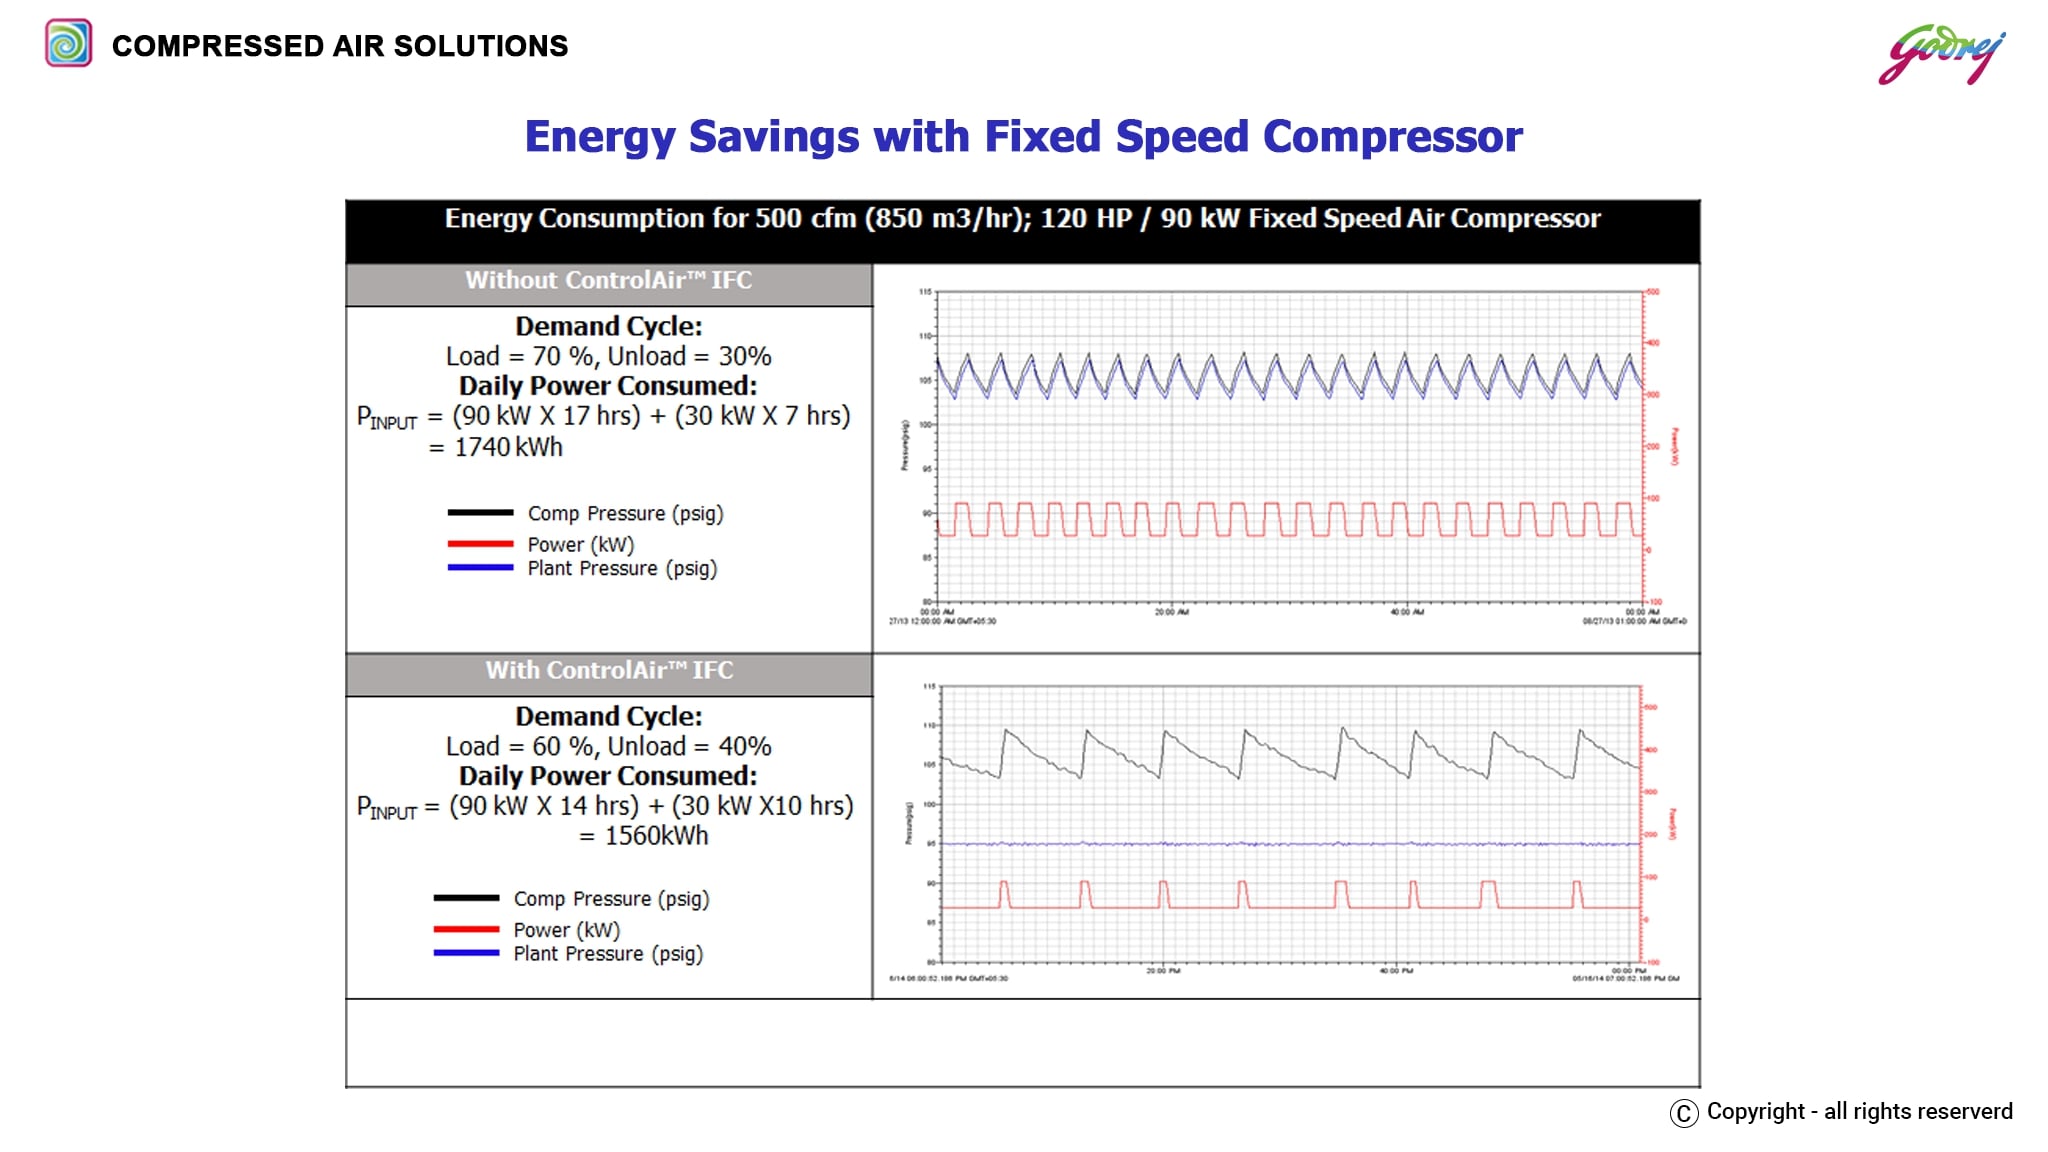 Energy Savings with Fixed Speed Compressor-ENERGY SAVING SOLUTIONS IN COMPRESSED AIR NETWORK (GODREJ)